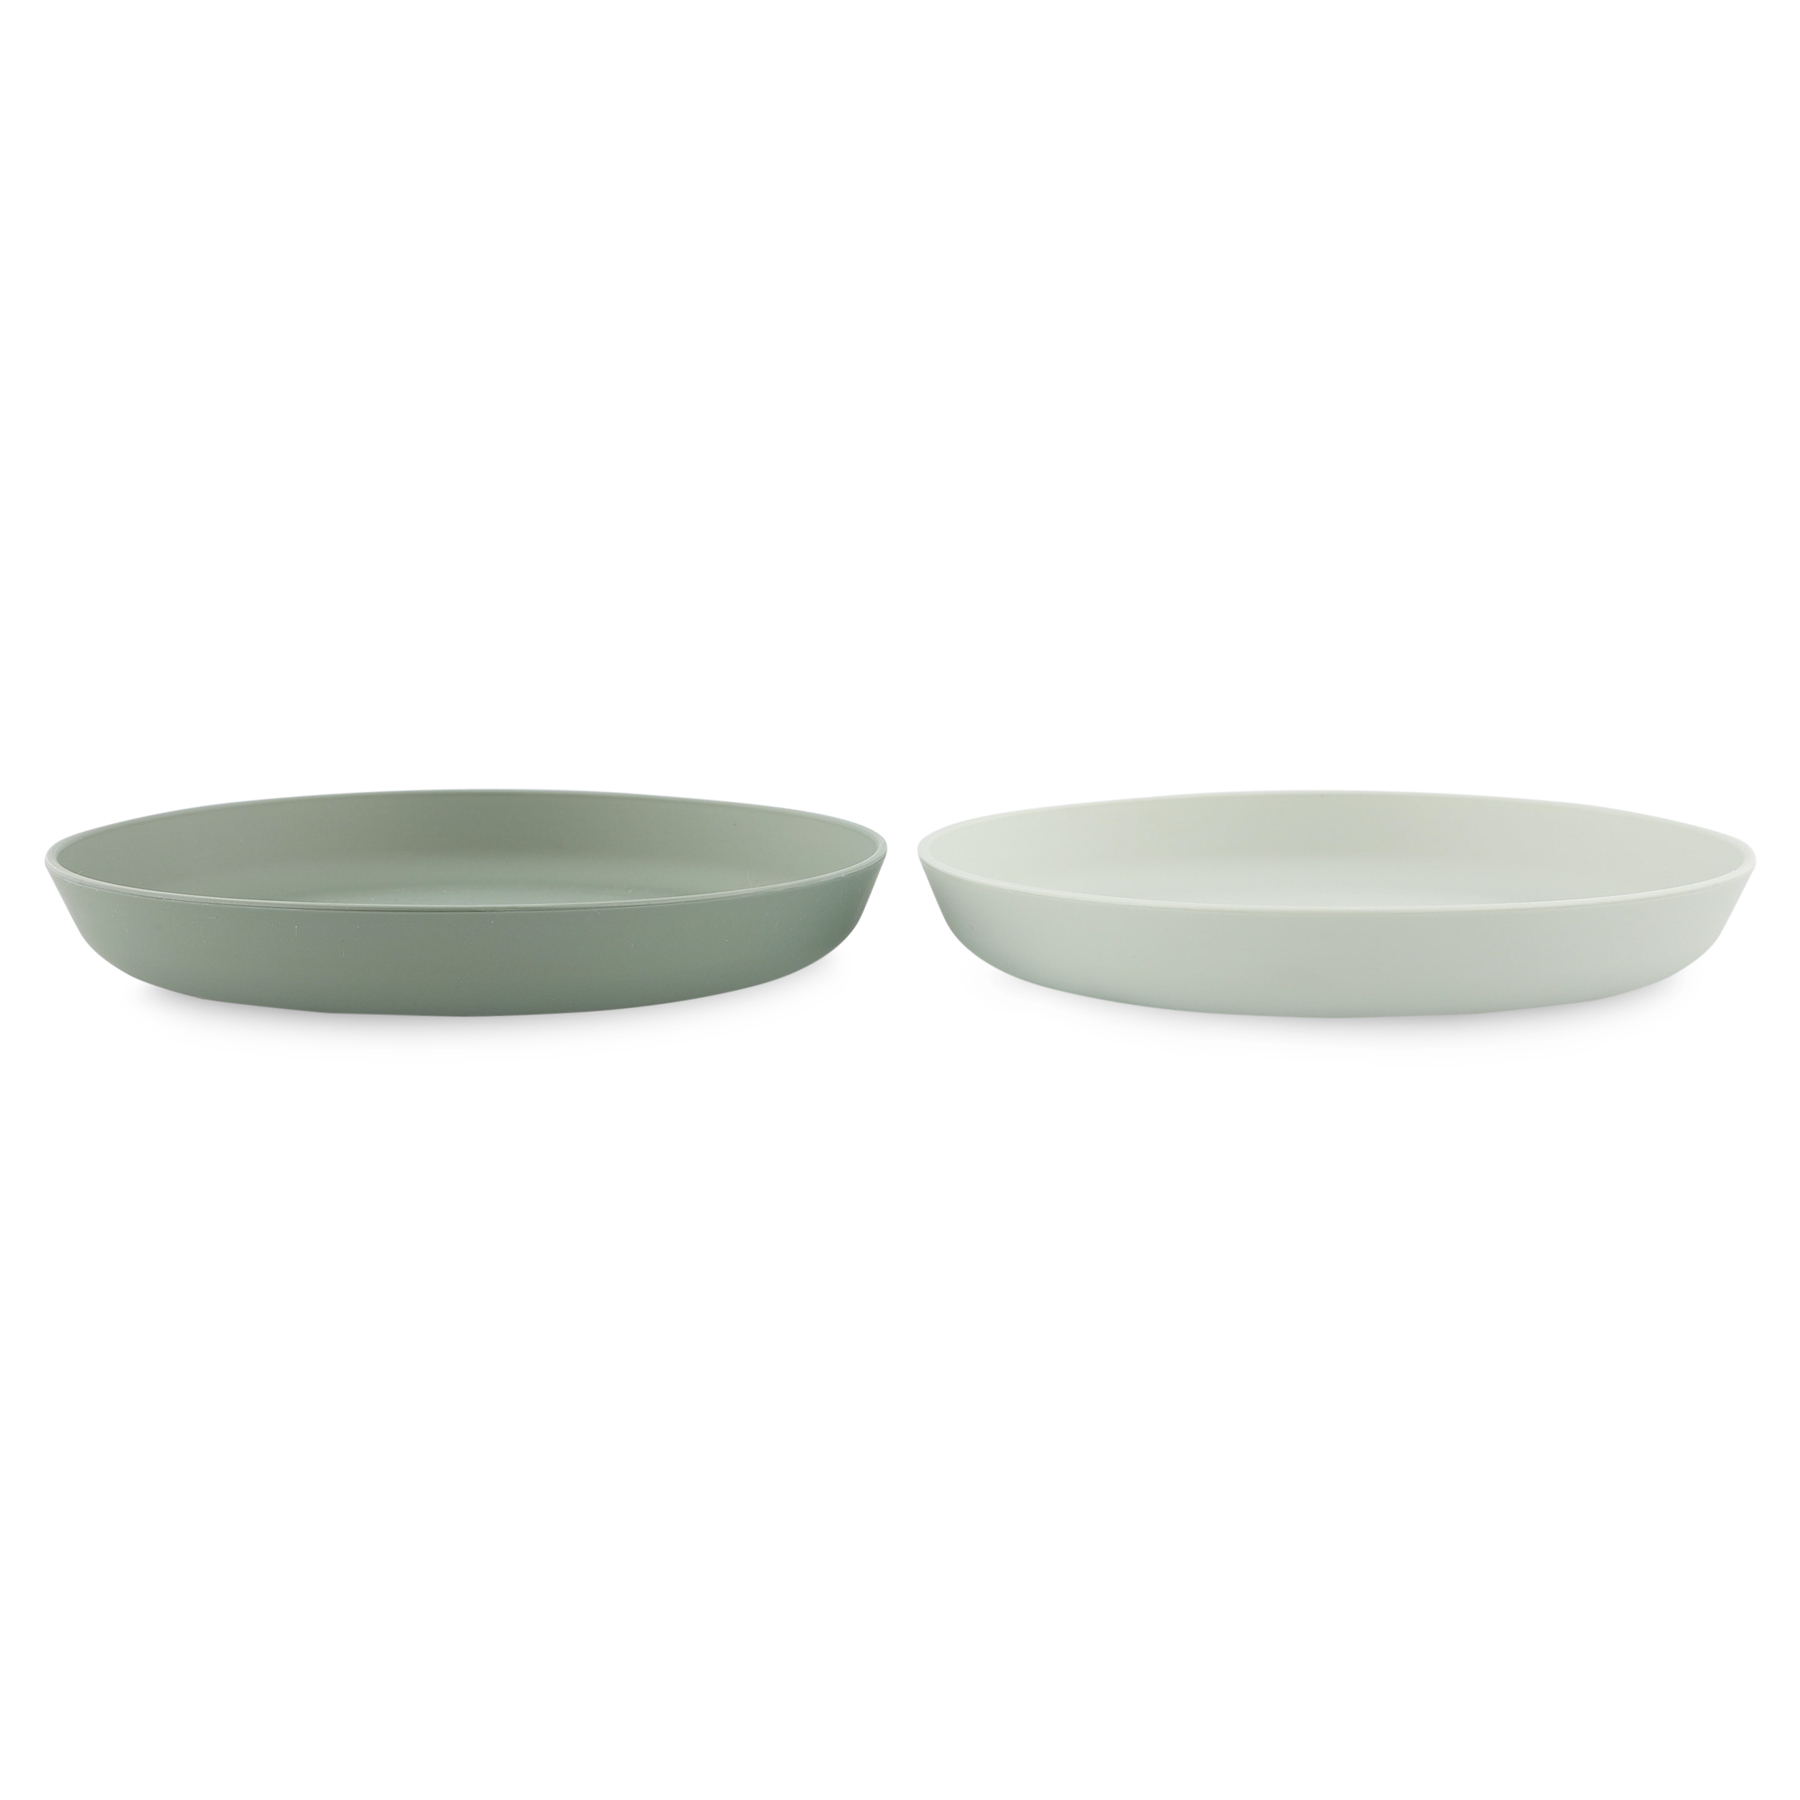 PLA plate 2-pack - Olive